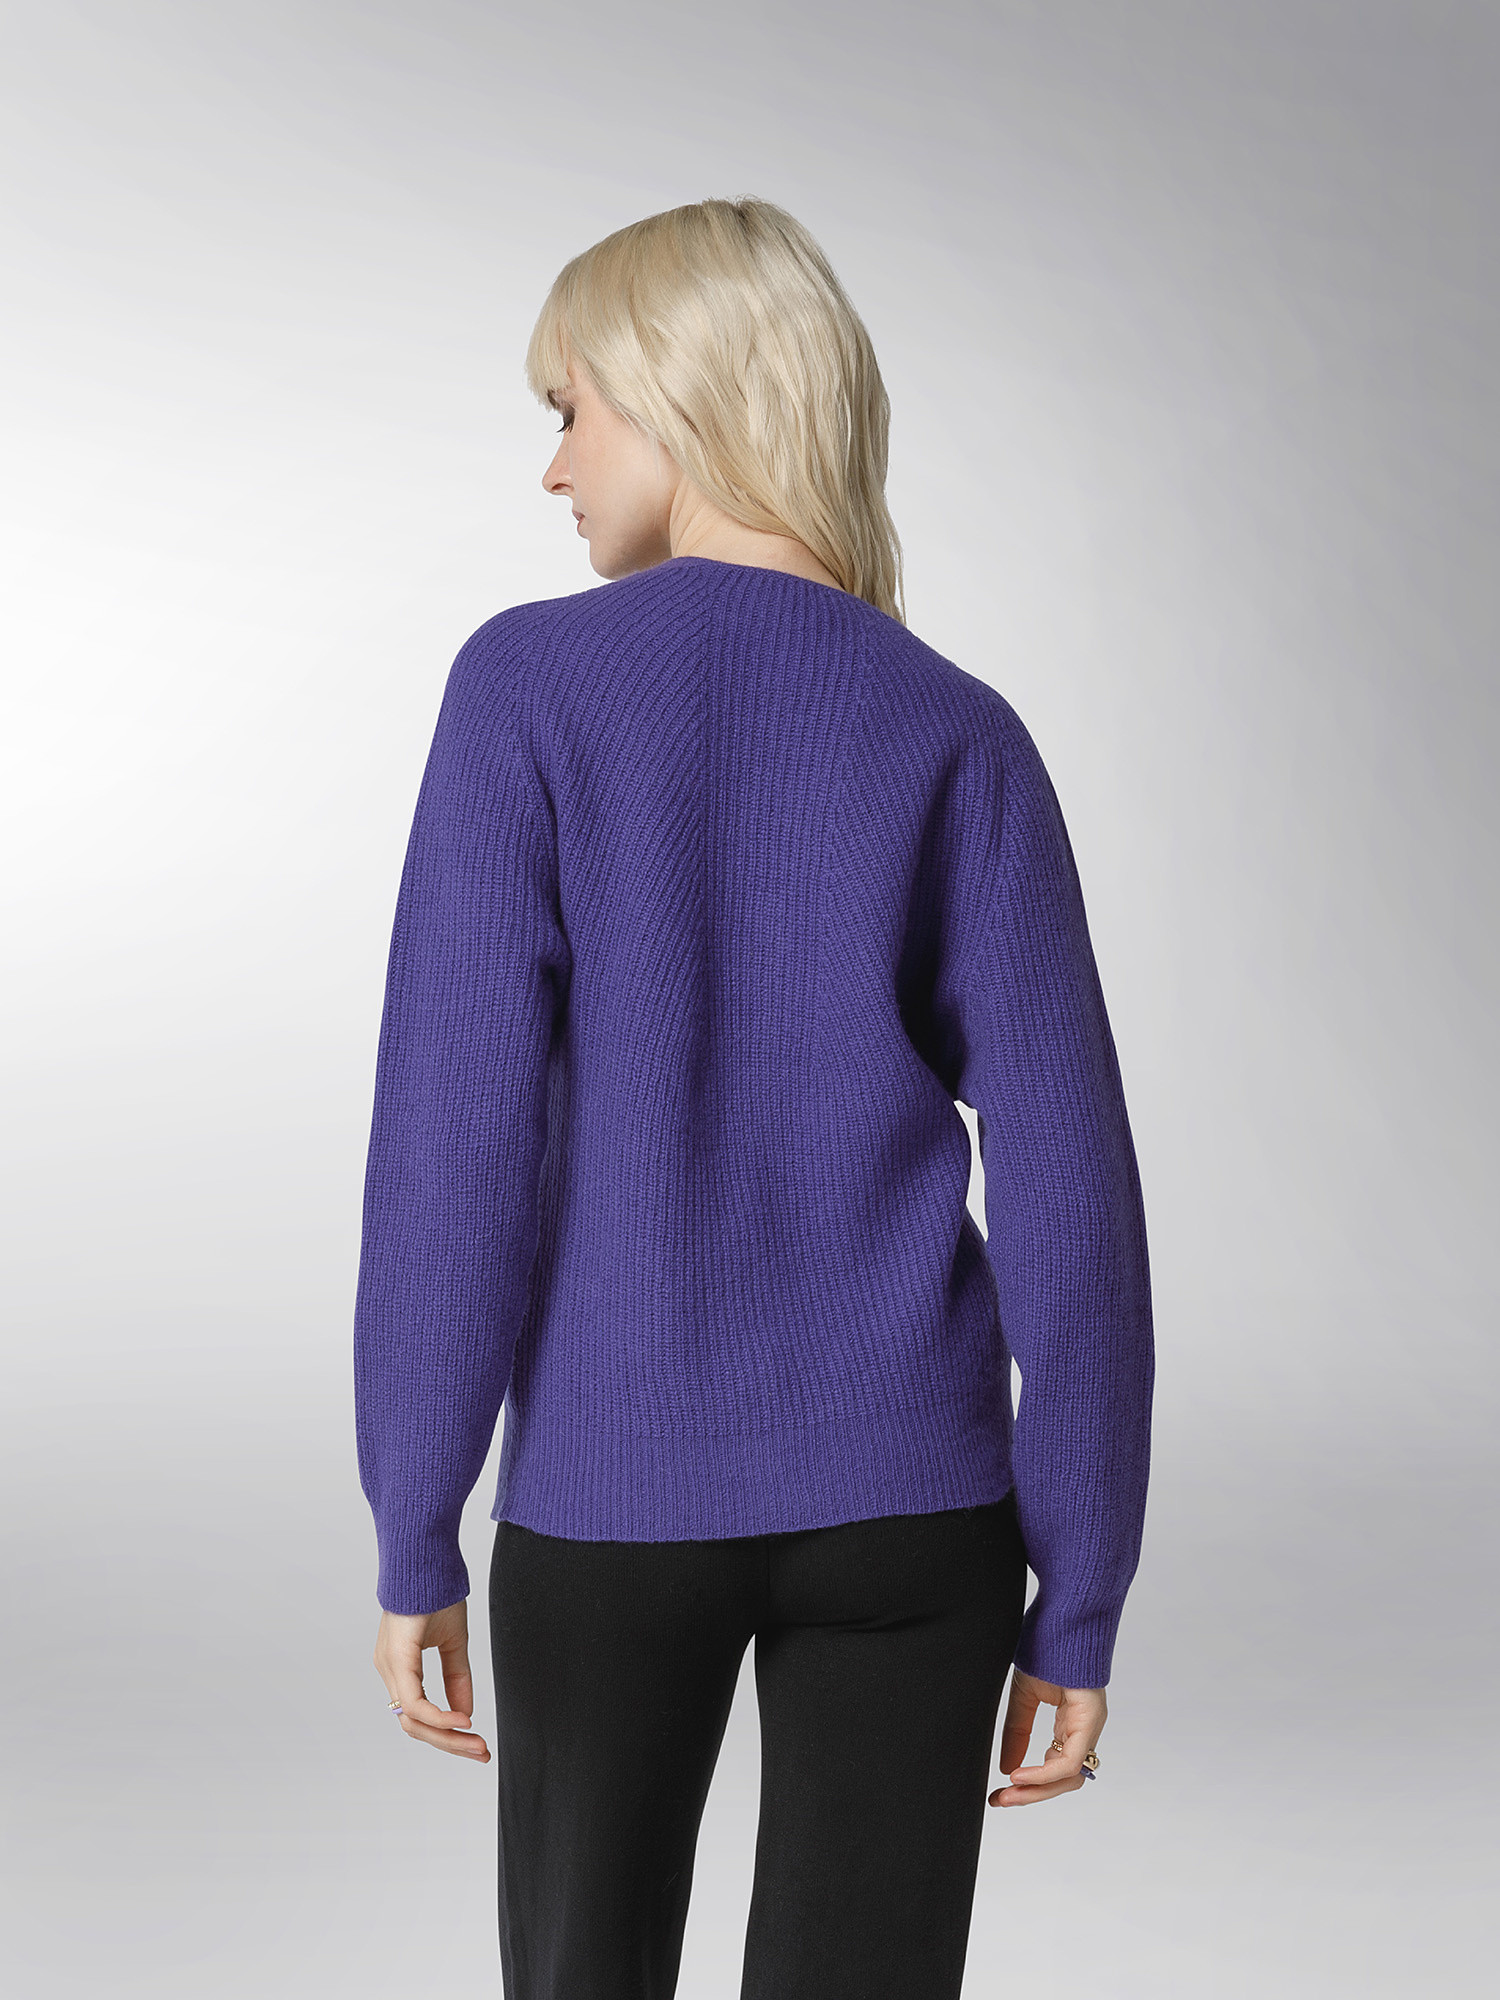 K Collection - Cardigan, Purple, large image number 3